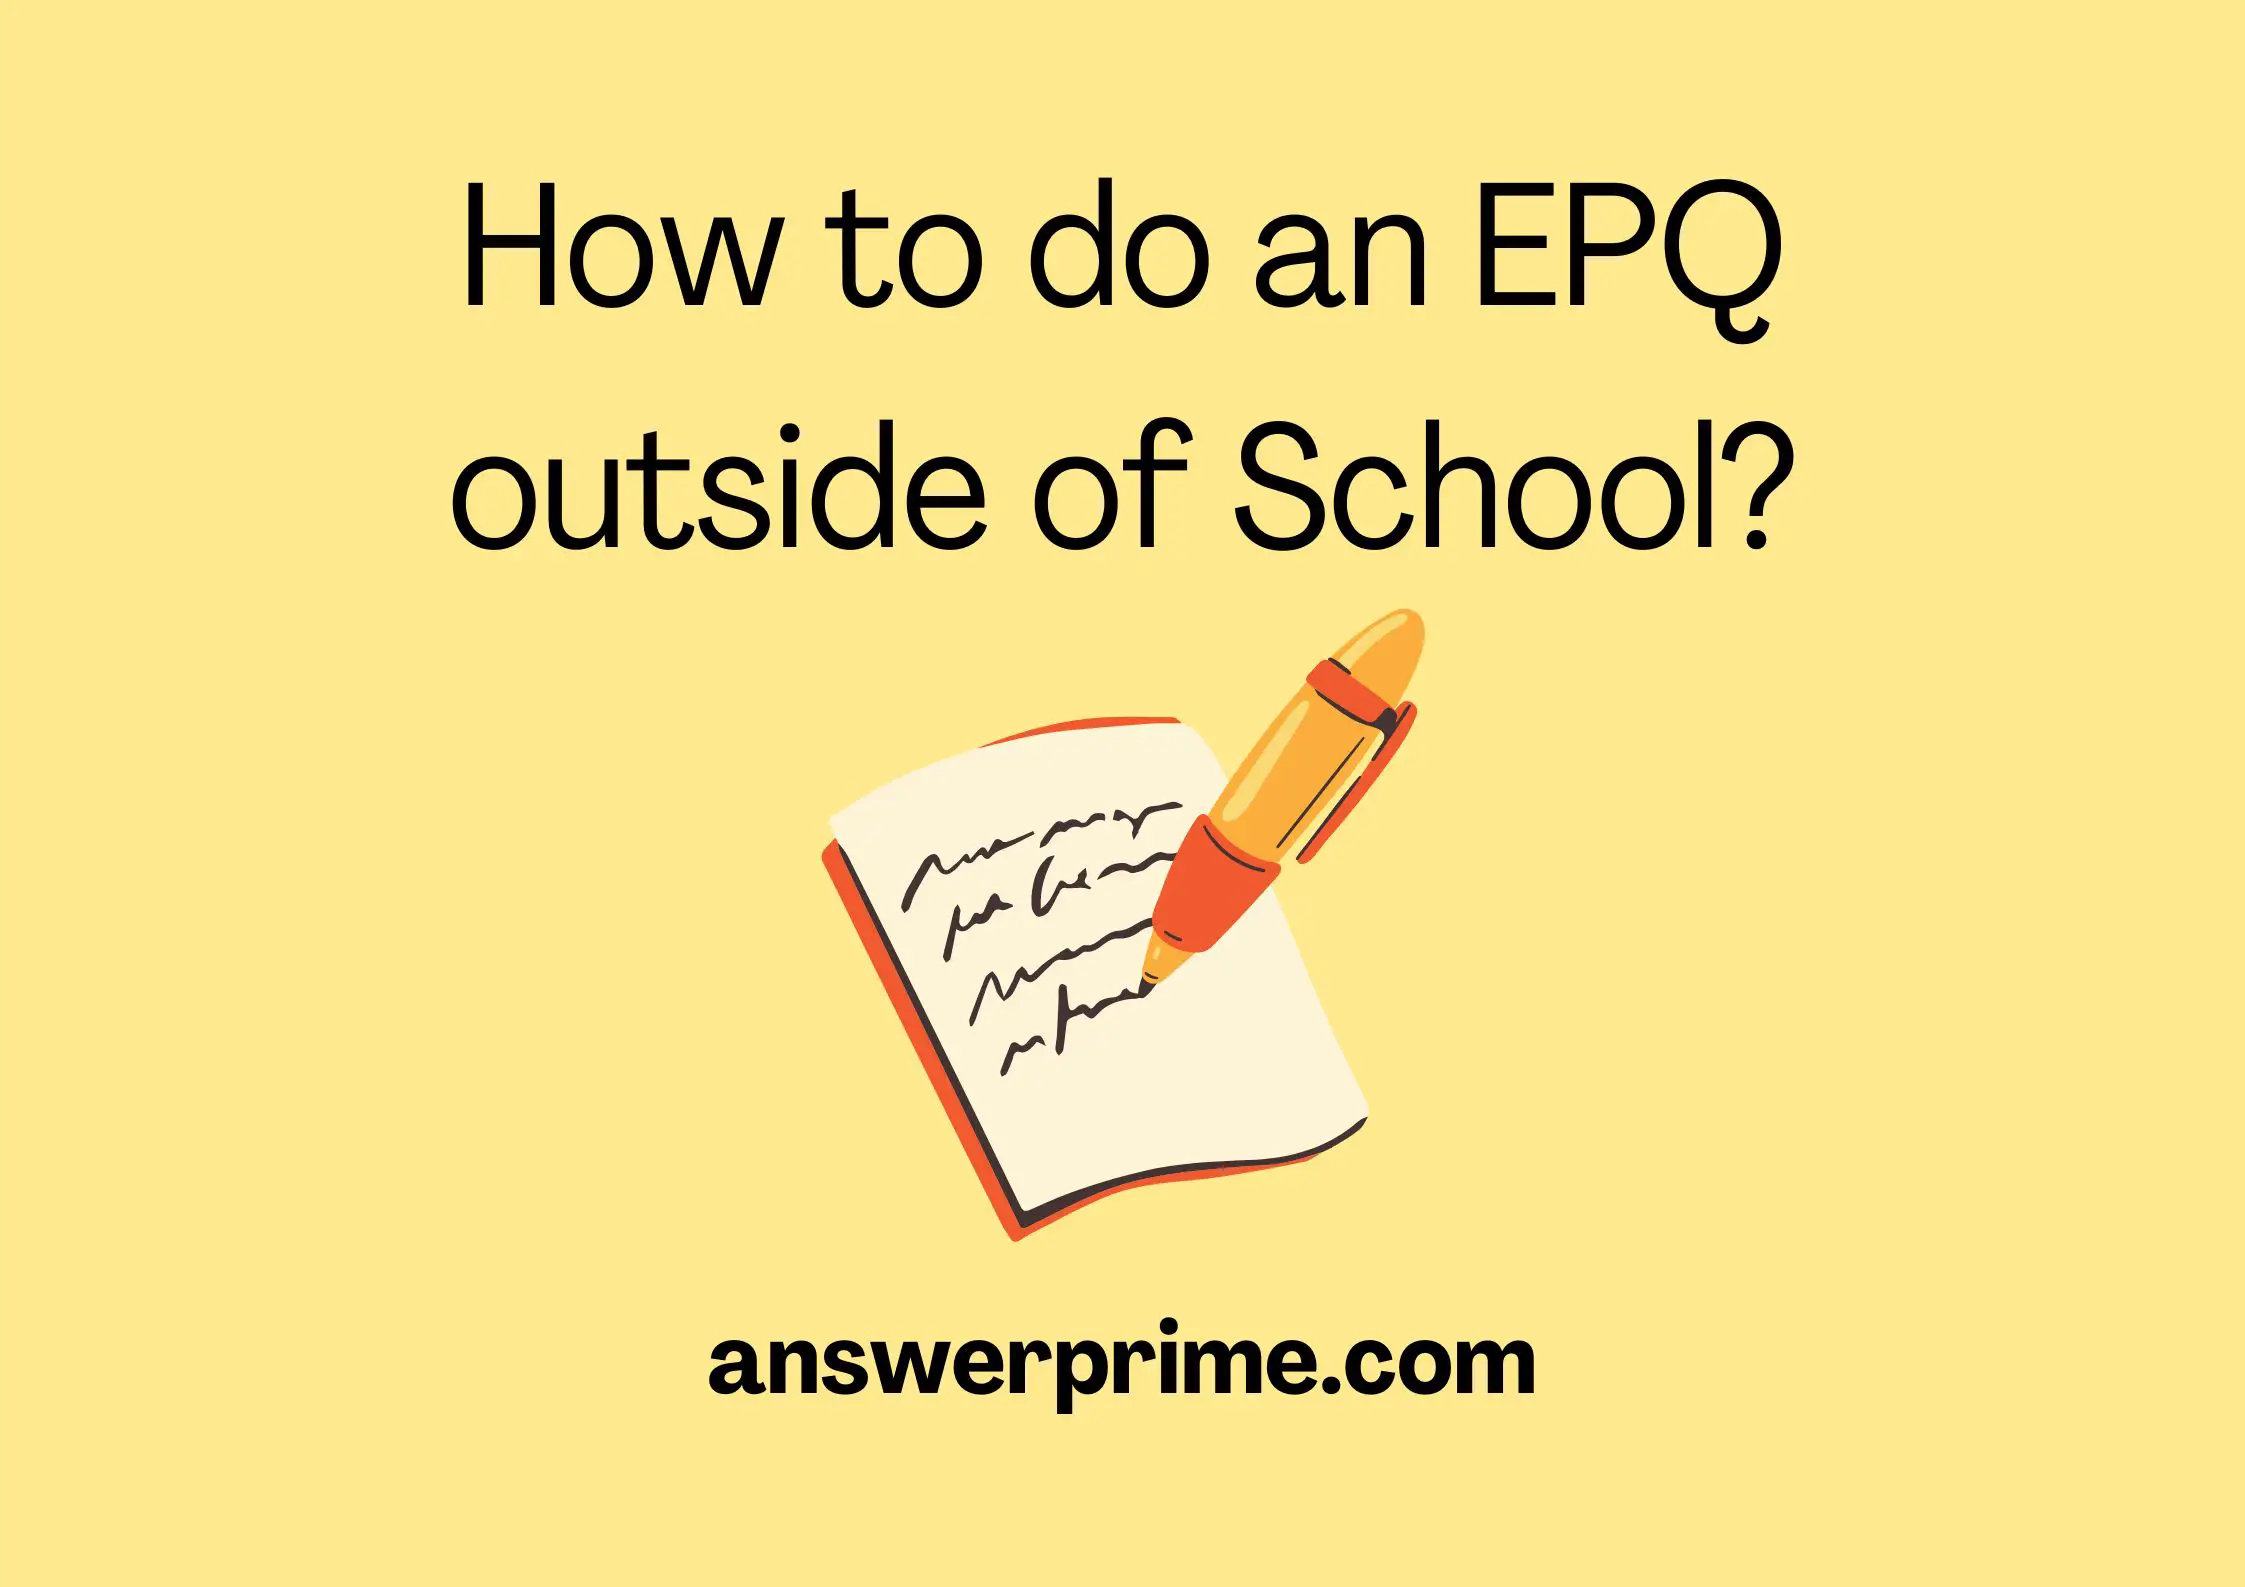 How to do an EPQ outside of School?